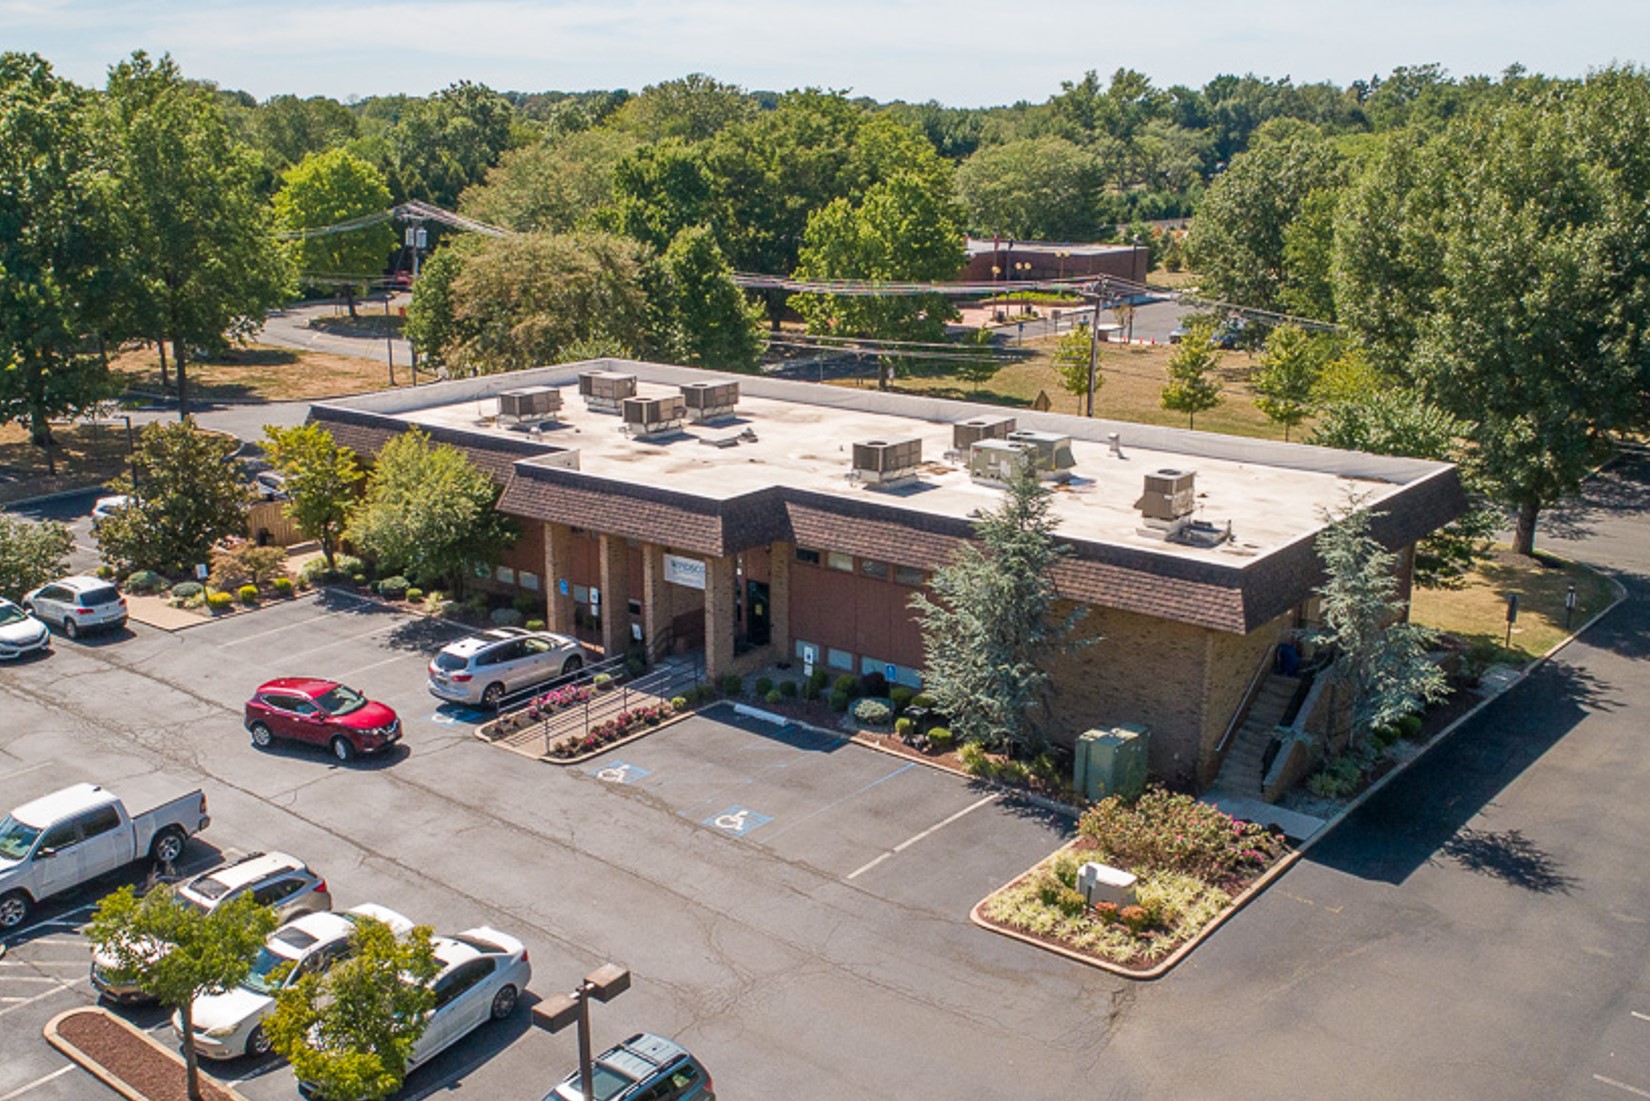 Fennelly Associates Appointed Investment Sales Team for 10,000-Square-Foot Medical Office Building in East Windsor, N.J.